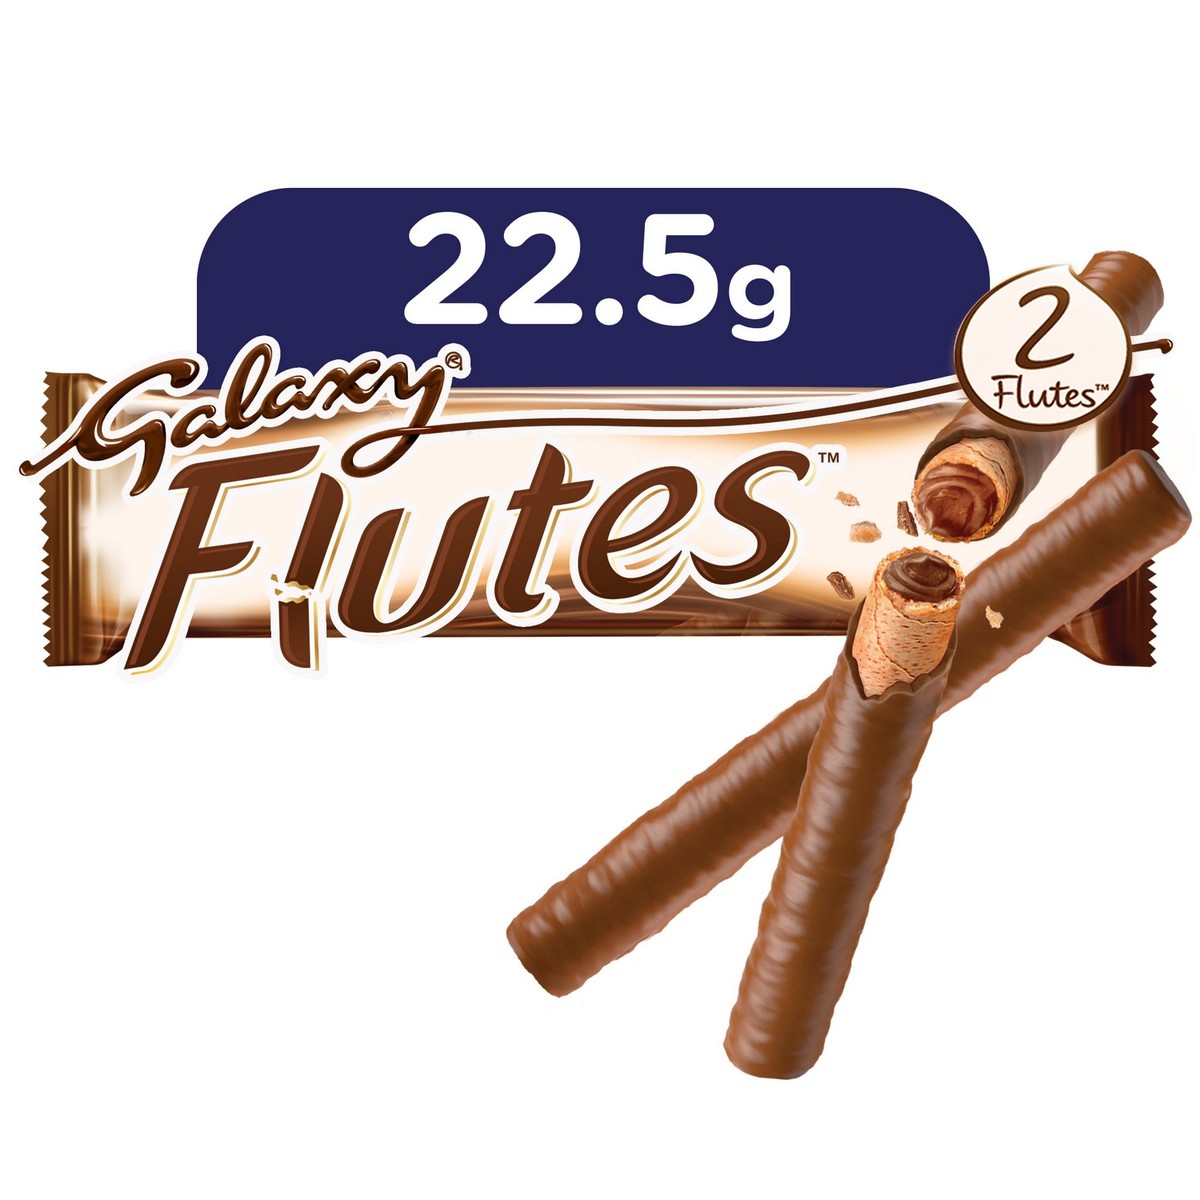 Galaxy Flutes Chocolate Twin Fingers 12 x 22.5g